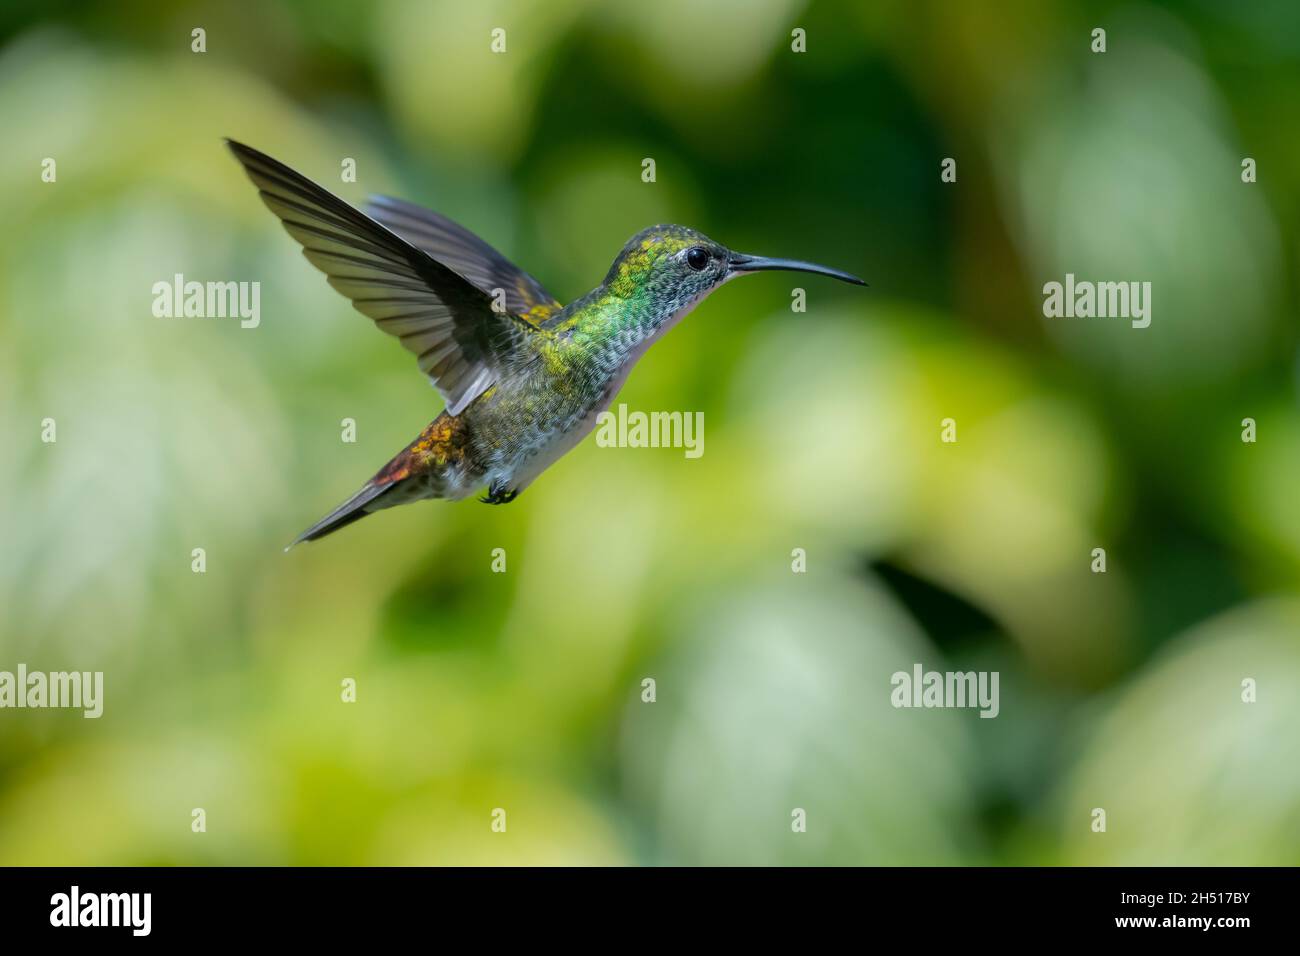 White-chested Emerald hummingbird, Amazilia brevirostris, hovering in a garden with green plants blurred in the background. Stock Photo